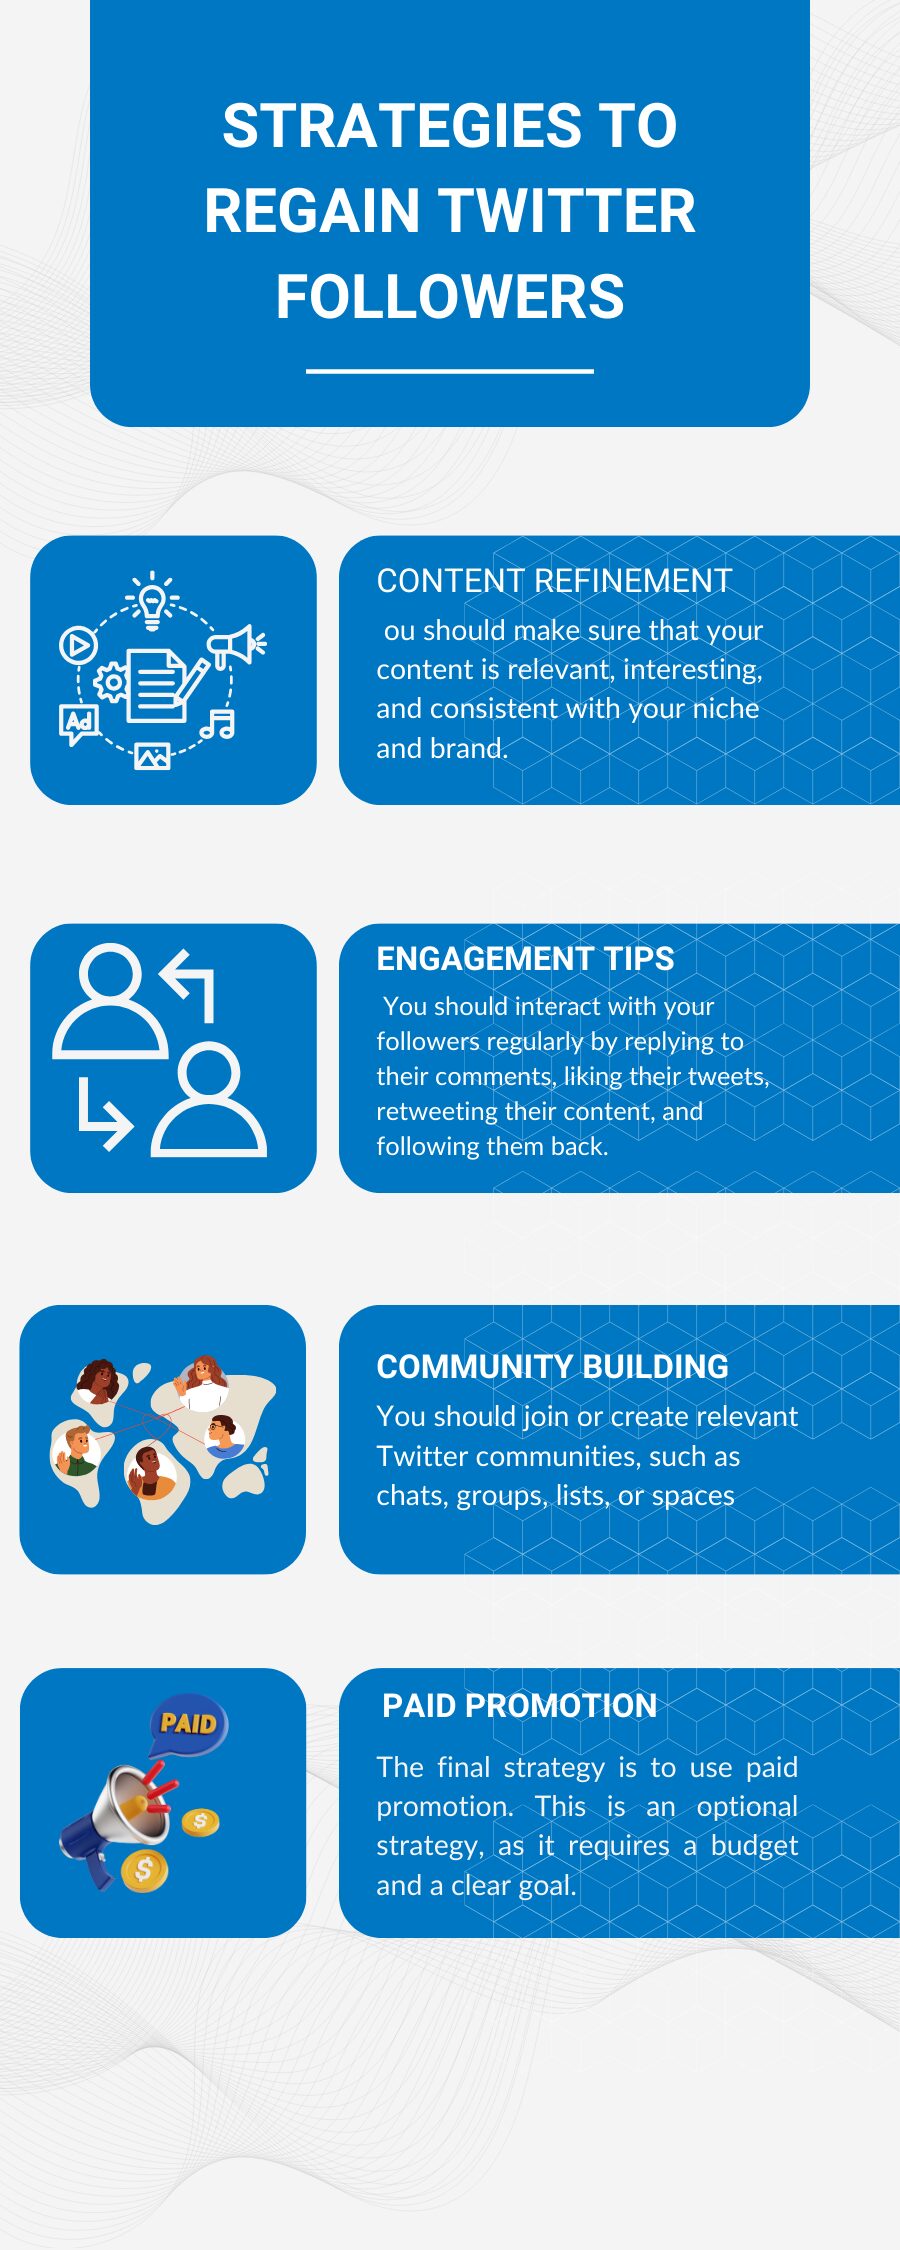 An infographic to illustrate the Strategies to Regain Followers